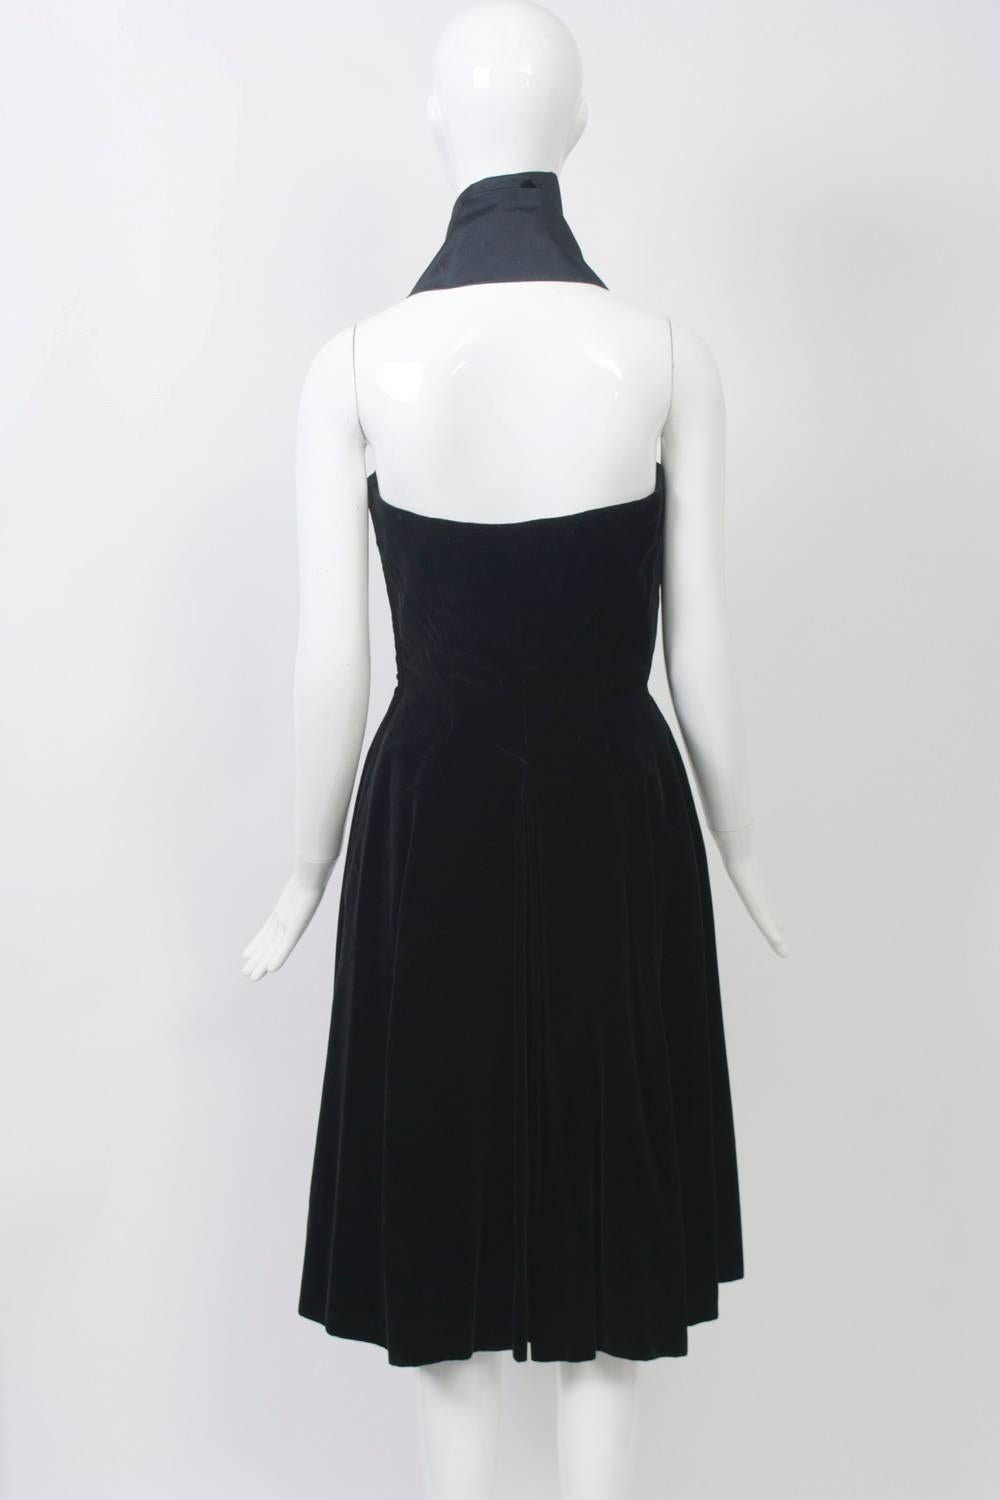 J. Suzanne Talbot was a celebrated designer during the 1920s and onward in France, known particularly for her hat designs. This dress from the 1950s, bearing her label, shows the hallmarks of couture. Crafted of black velvet, the dress features a